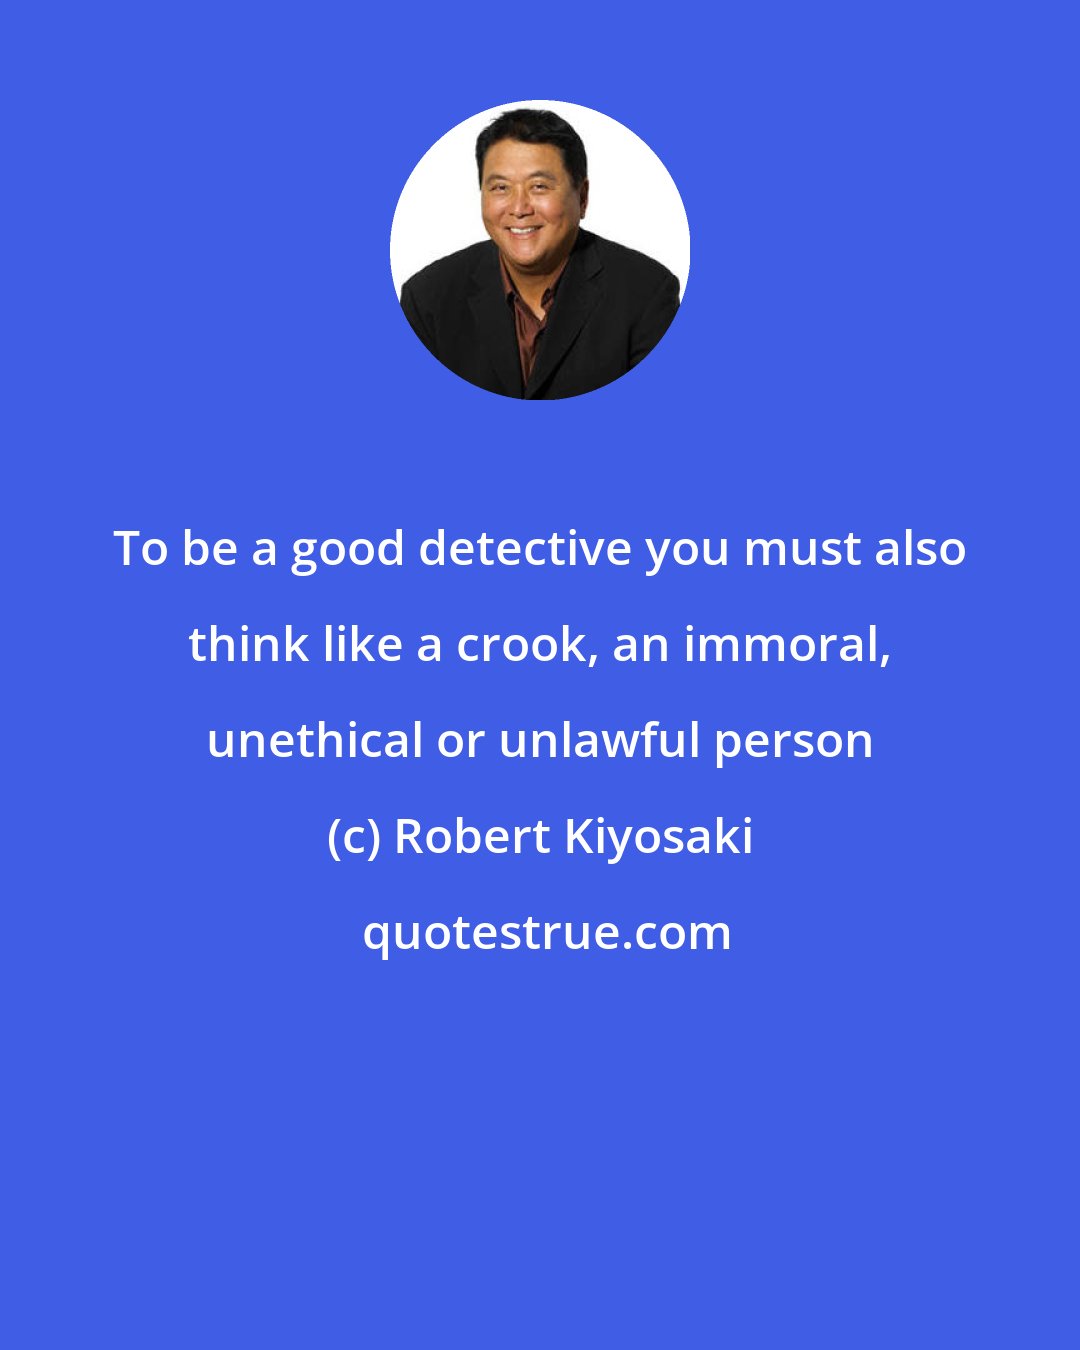 Robert Kiyosaki: To be a good detective you must also think like a crook, an immoral, unethical or unlawful person